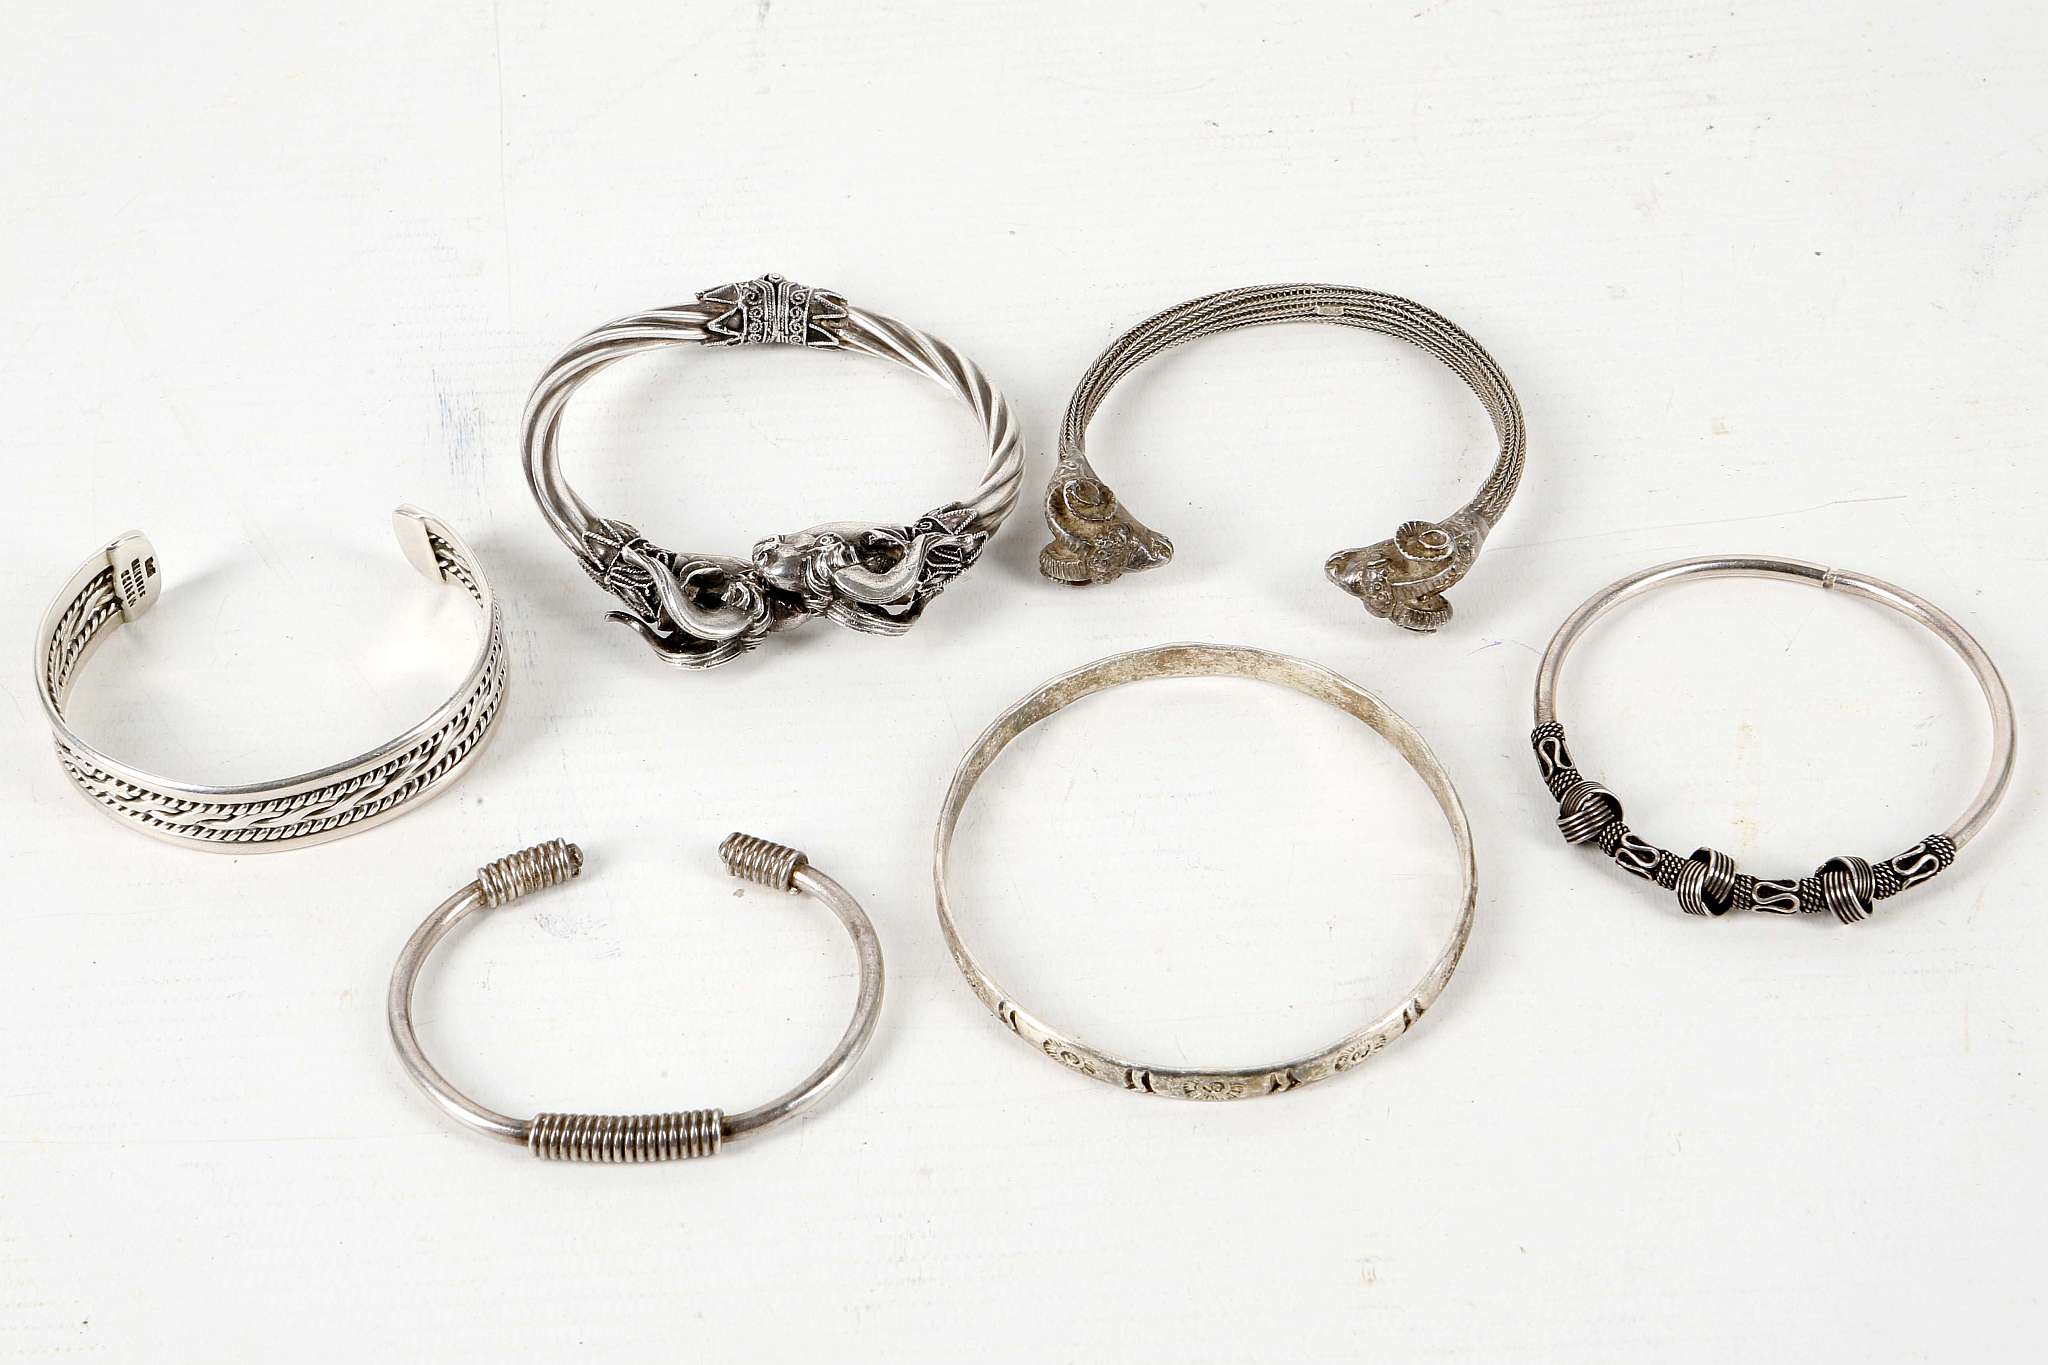 Six various .925 silver bracelets / bangles including hinged rams head cross-over, Mexican sun